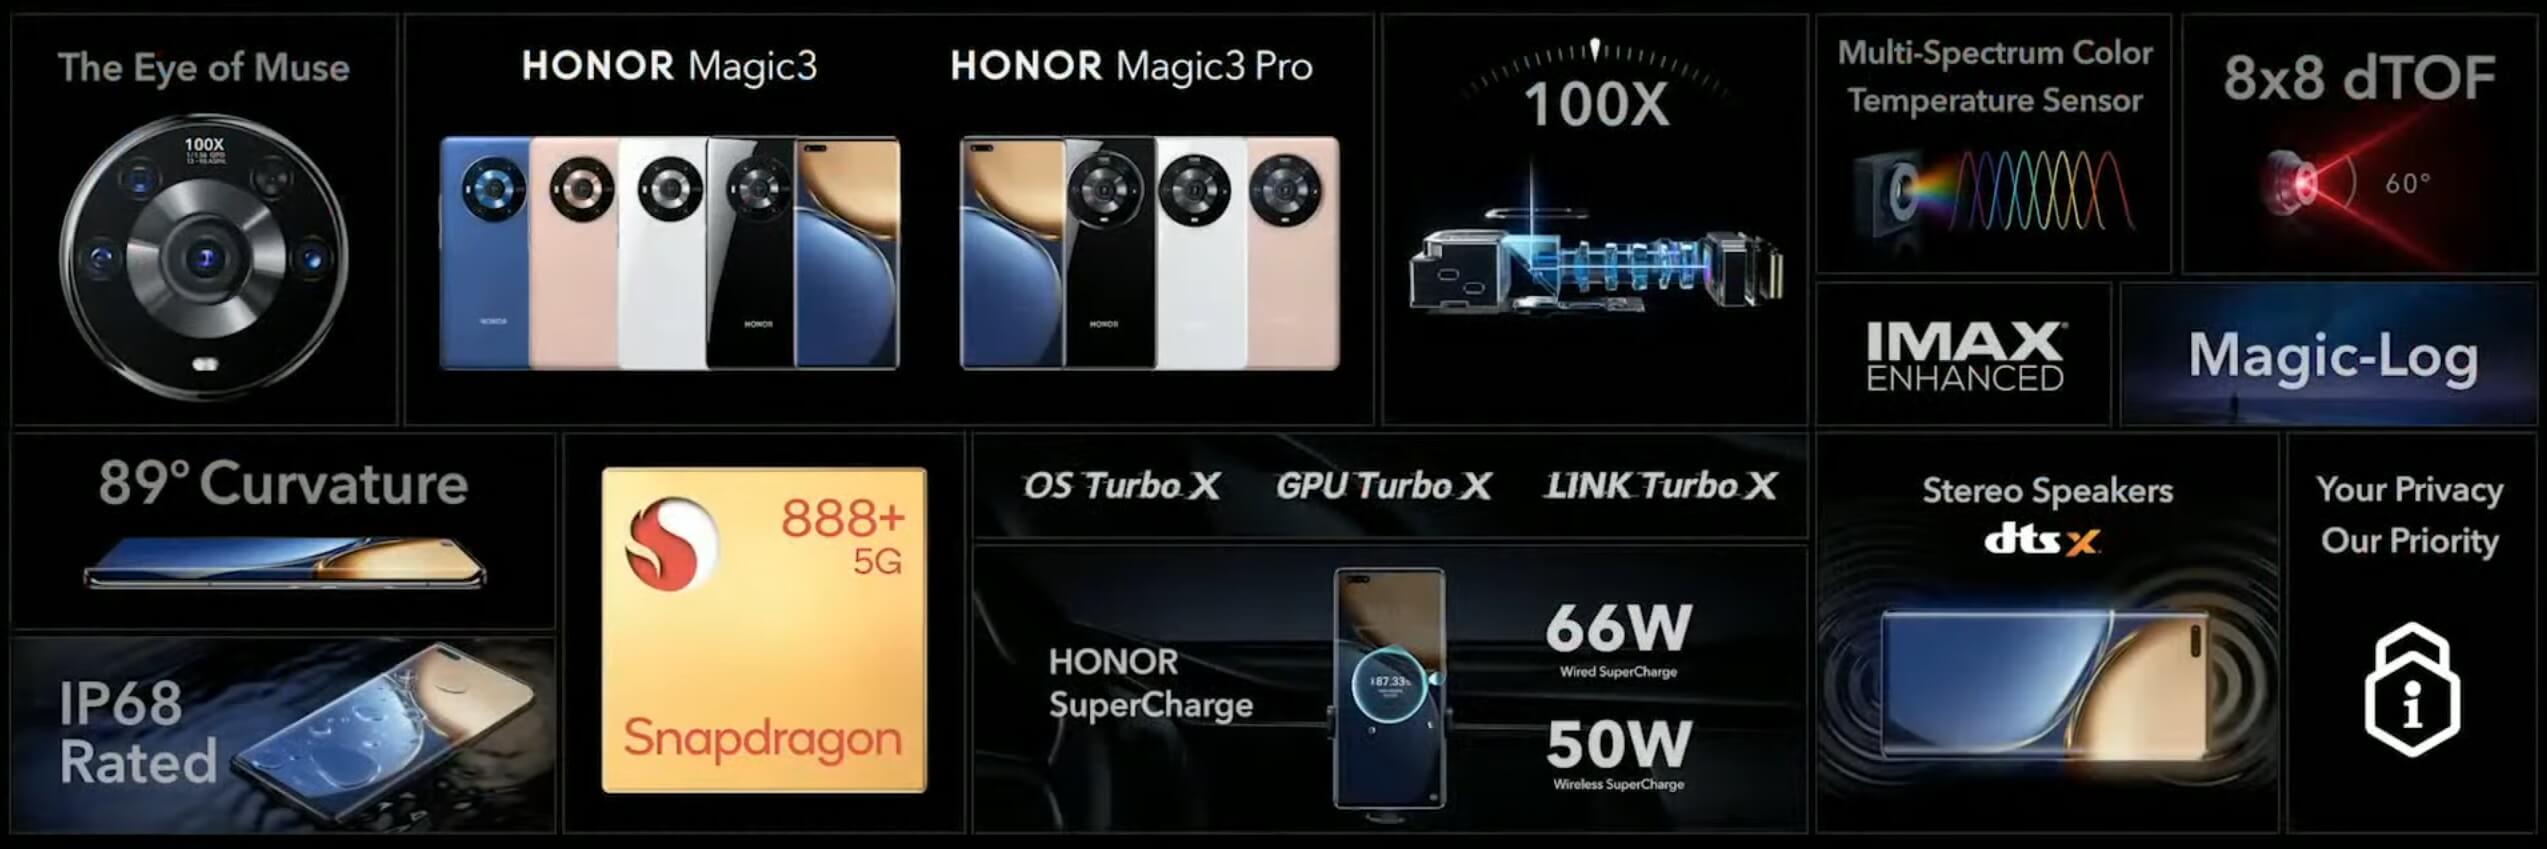 HONOR Magic3 series all features